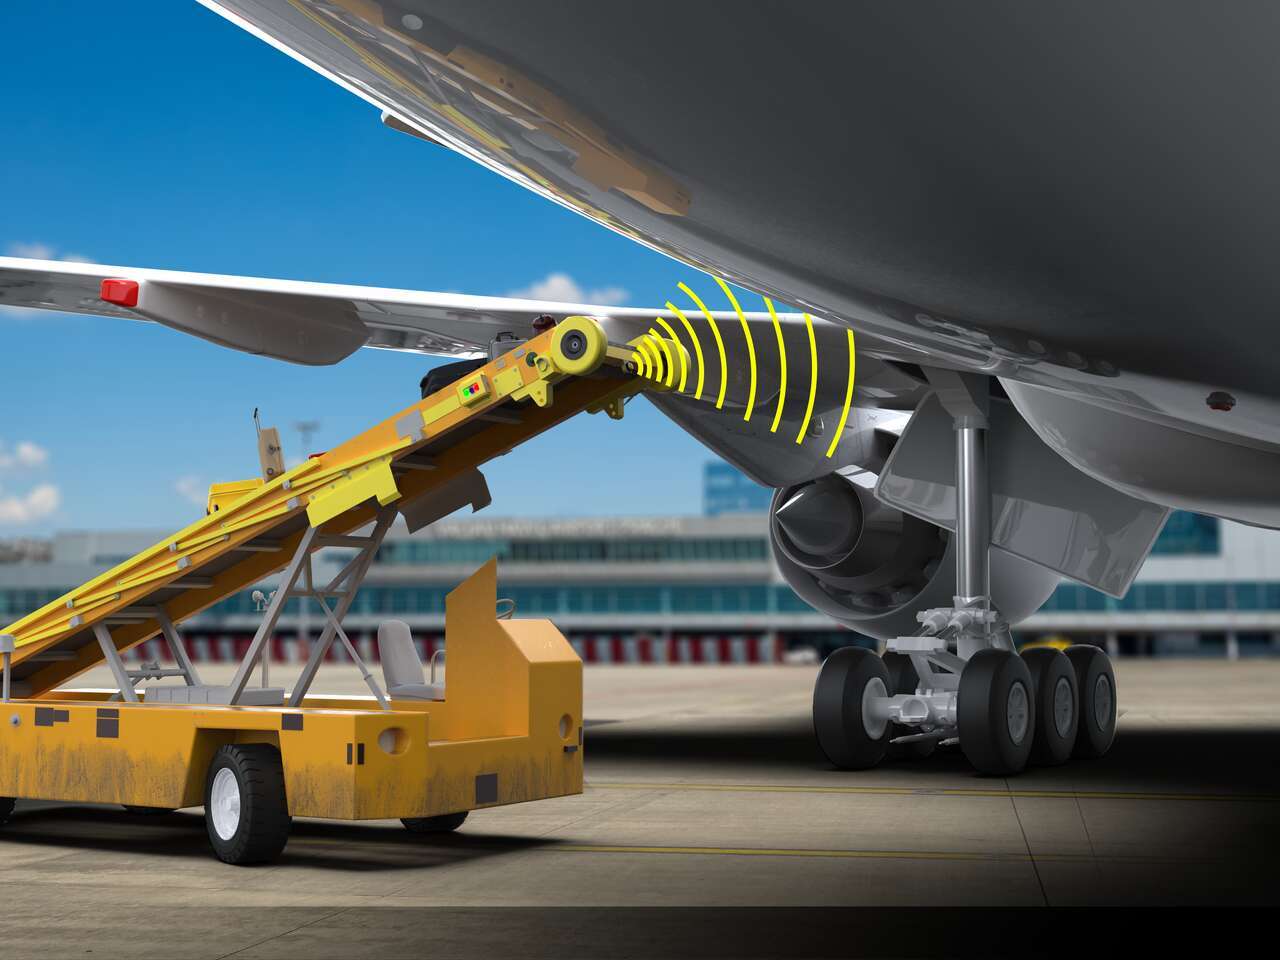 Preventing Baggage Handling Equipment from Damaging Aircraft